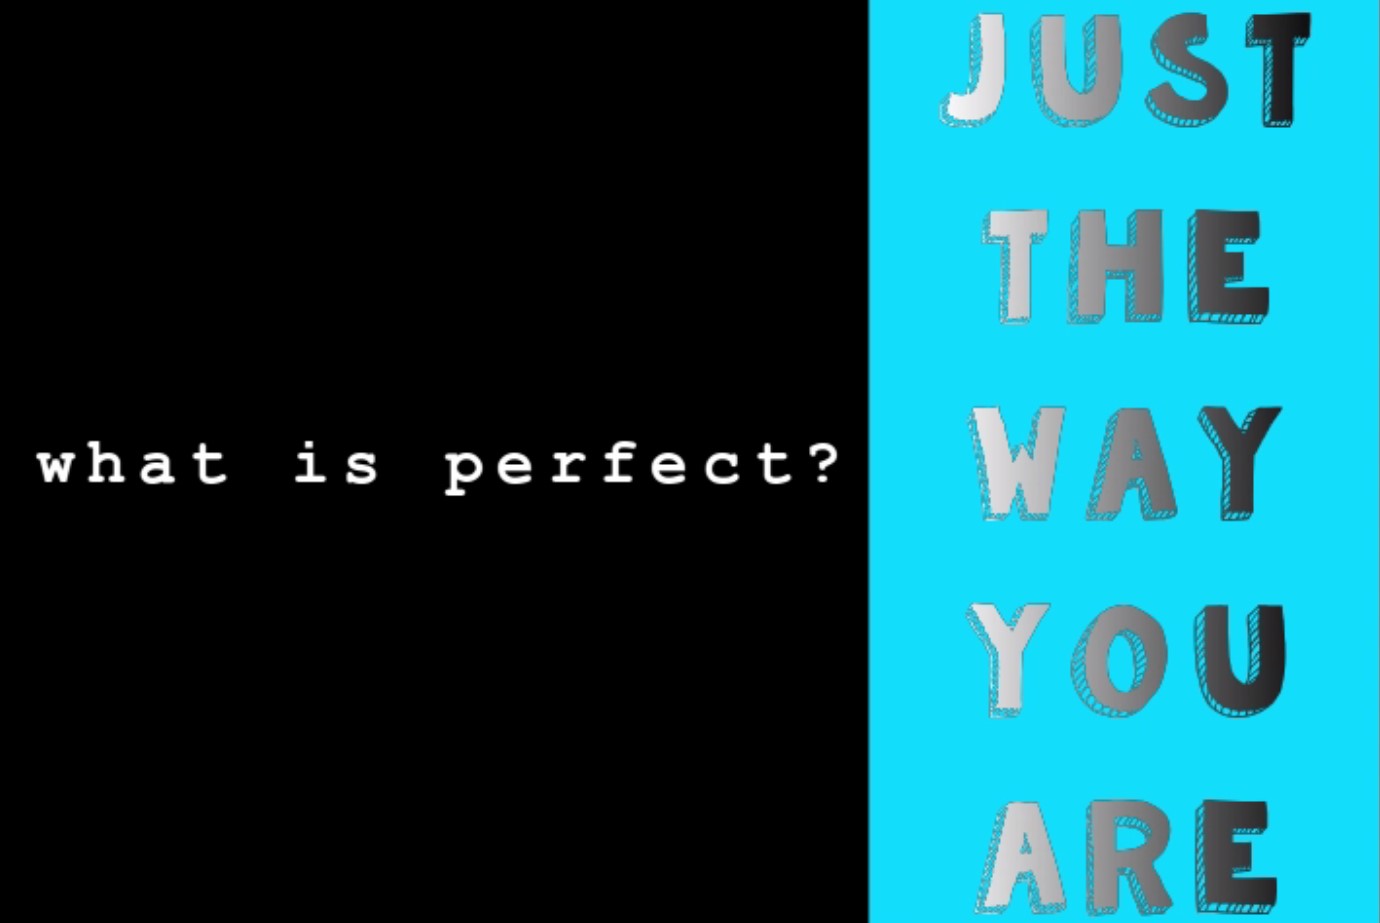 What is perfect? You are. Just the way you are.